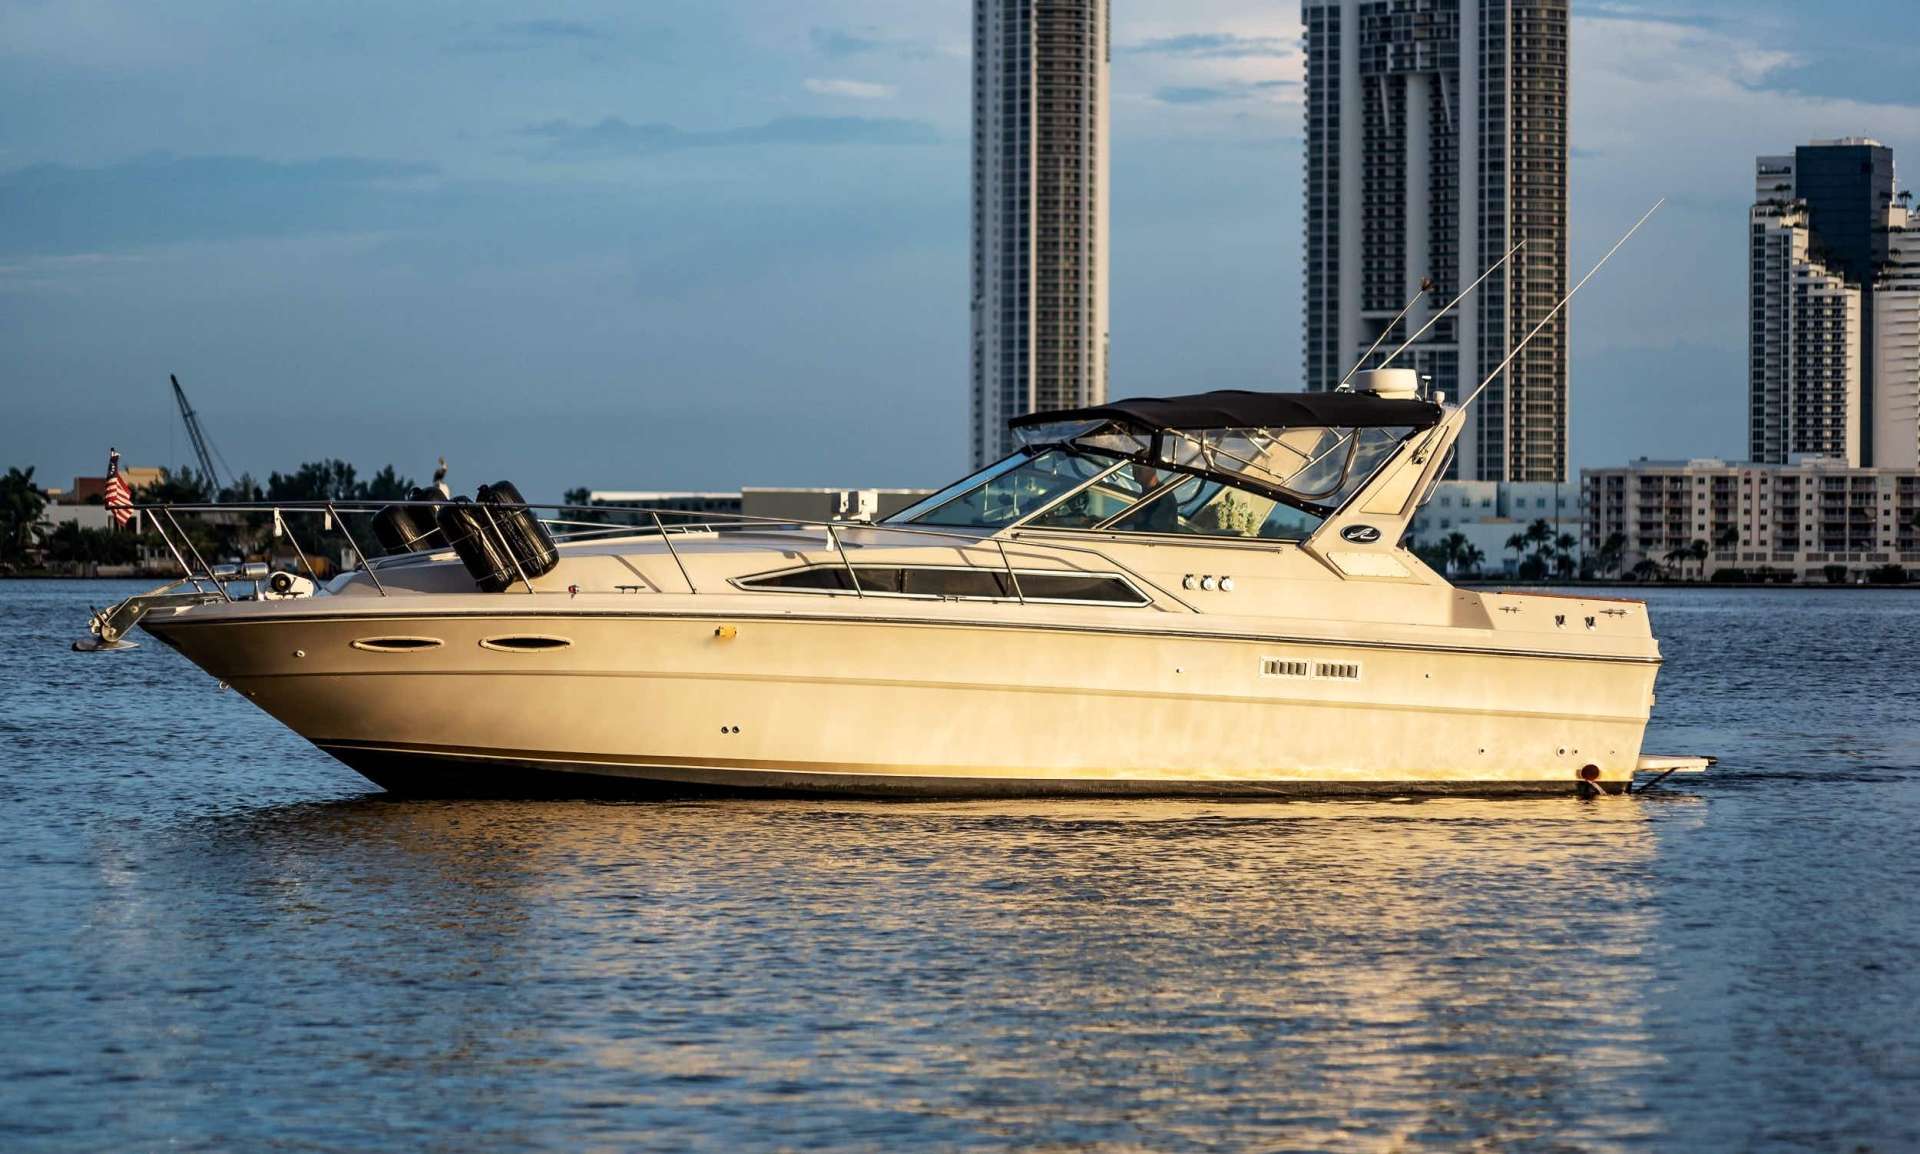 Sea Ray 370 Express Cruiser - Yacht Charter Fort Lauderdale & Boat hire in United States Florida Fort Lauderdale Aventura 2